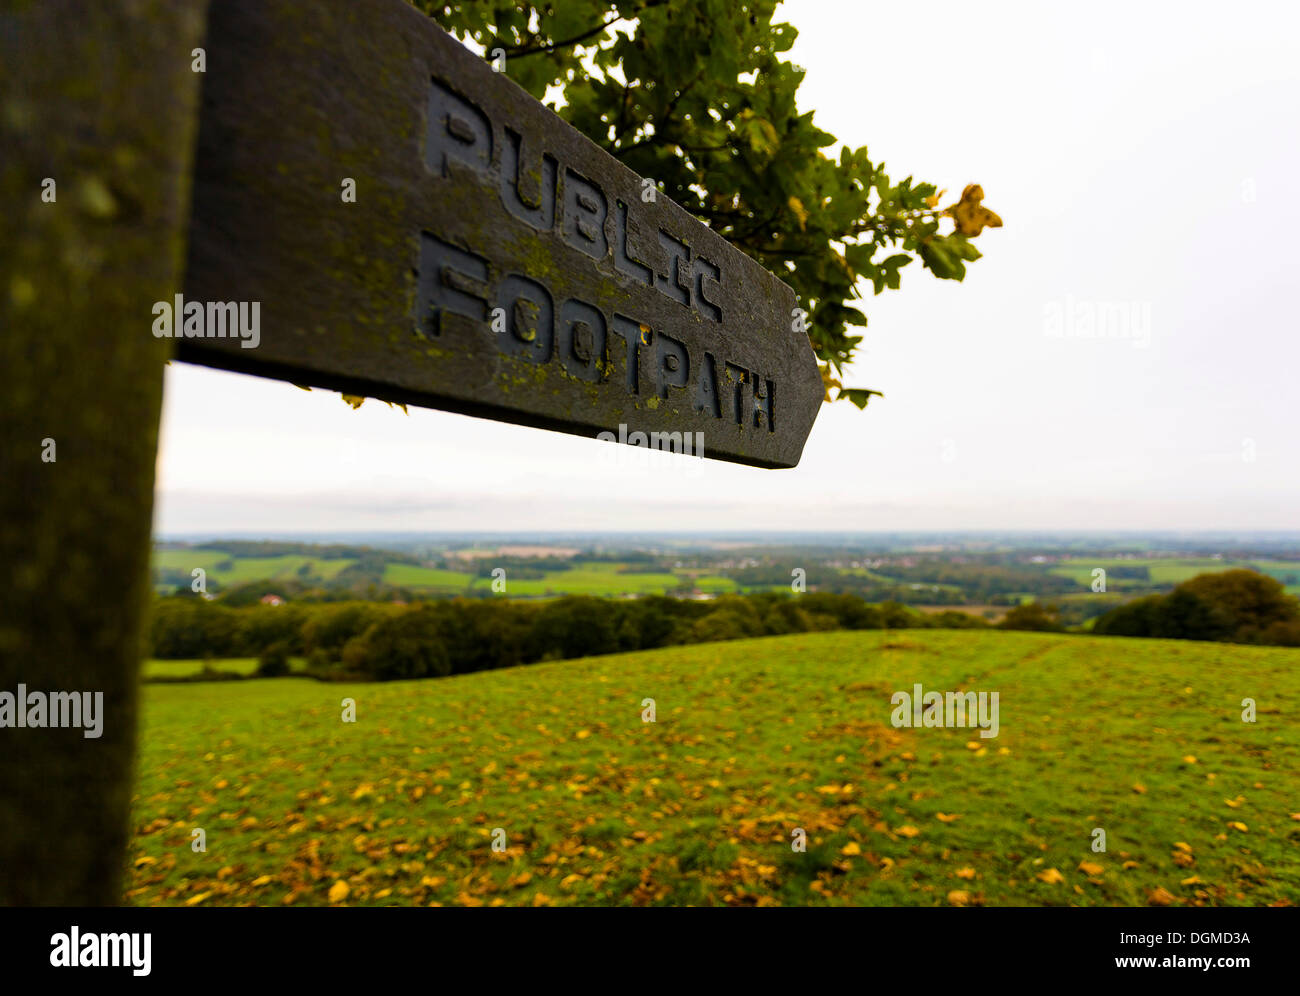 Signpost for a public footpath in England, United Kingdom, Europe Stock Photo